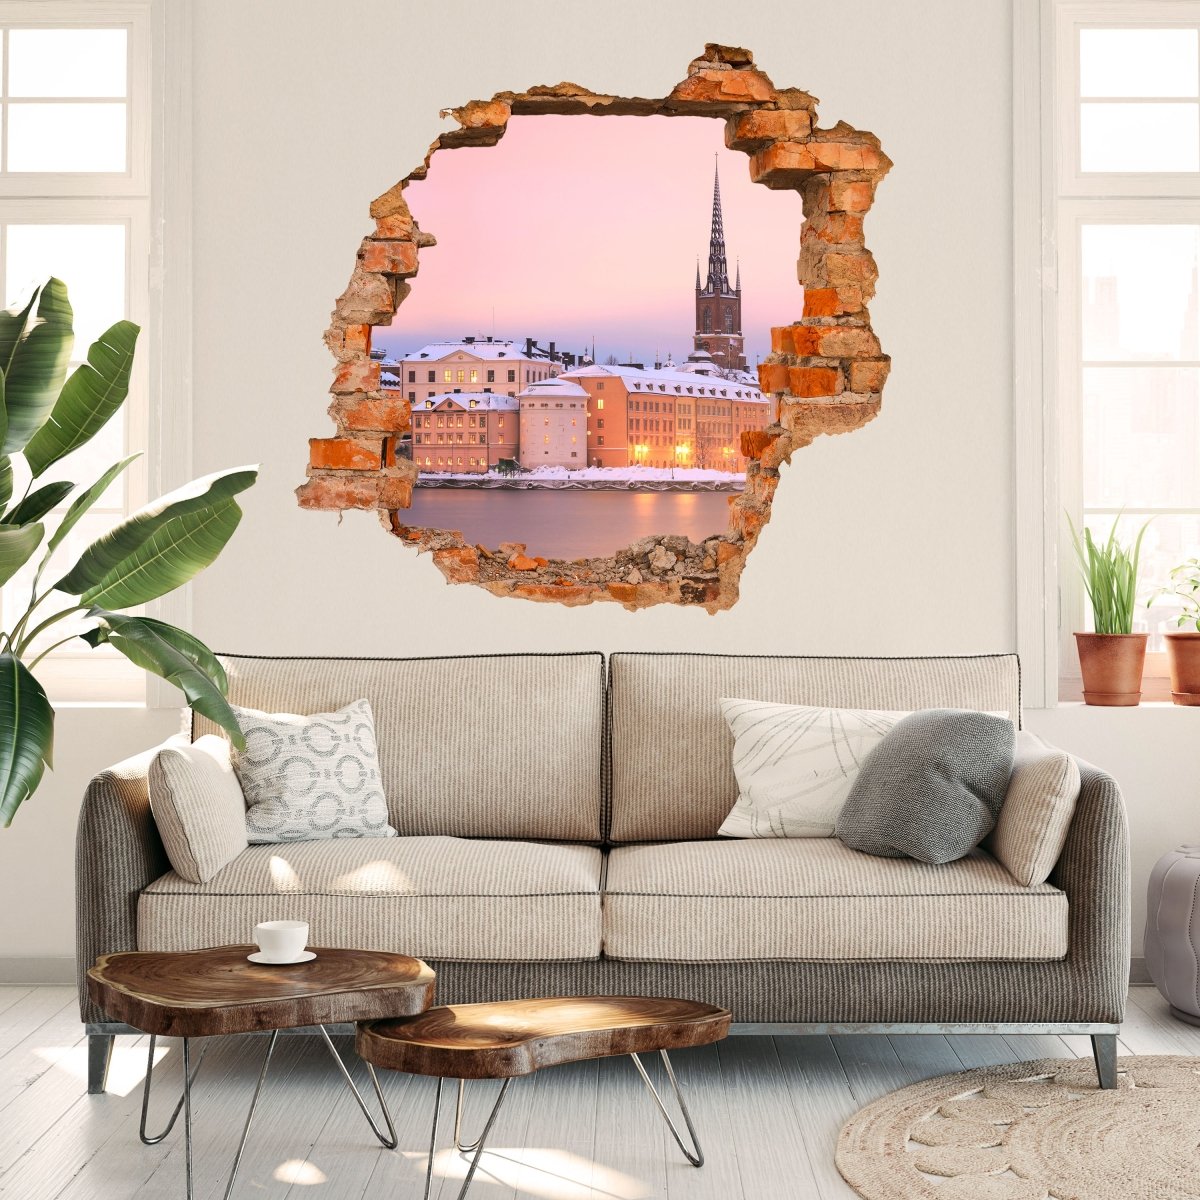 3D wall sticker Stockholm Panorama - Wall Decal M0933